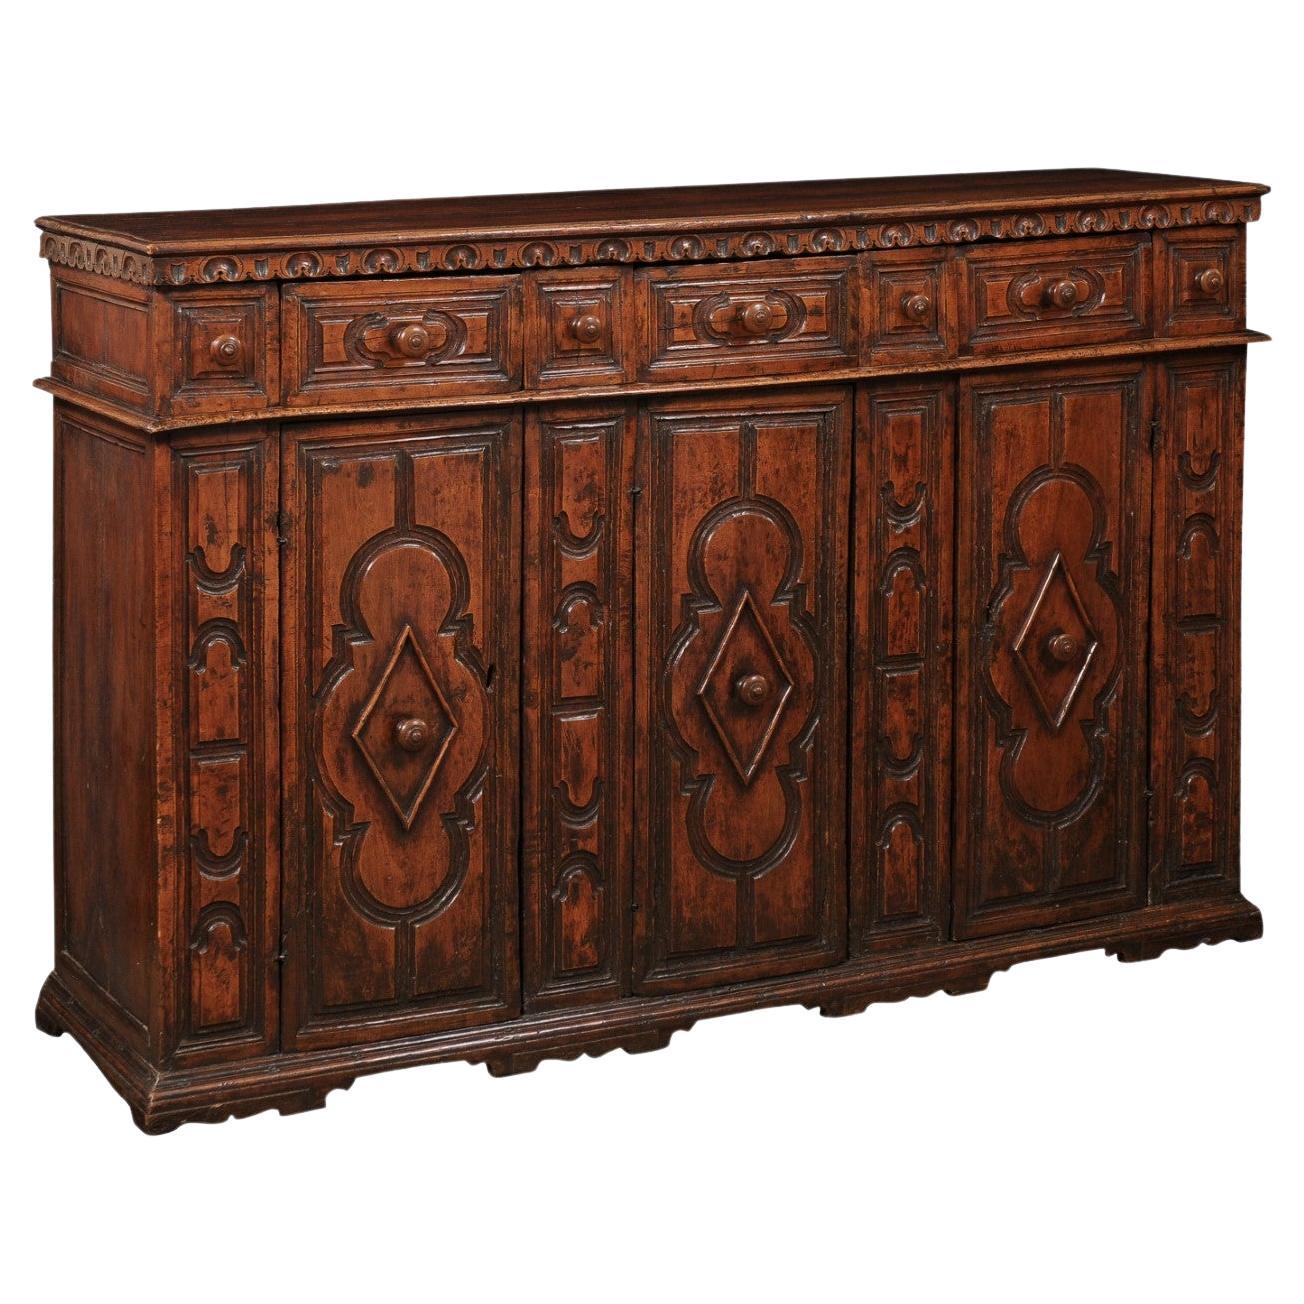 17th Century Italian Walnut Credenza with 3 Doors and 7 Drawers For Sale